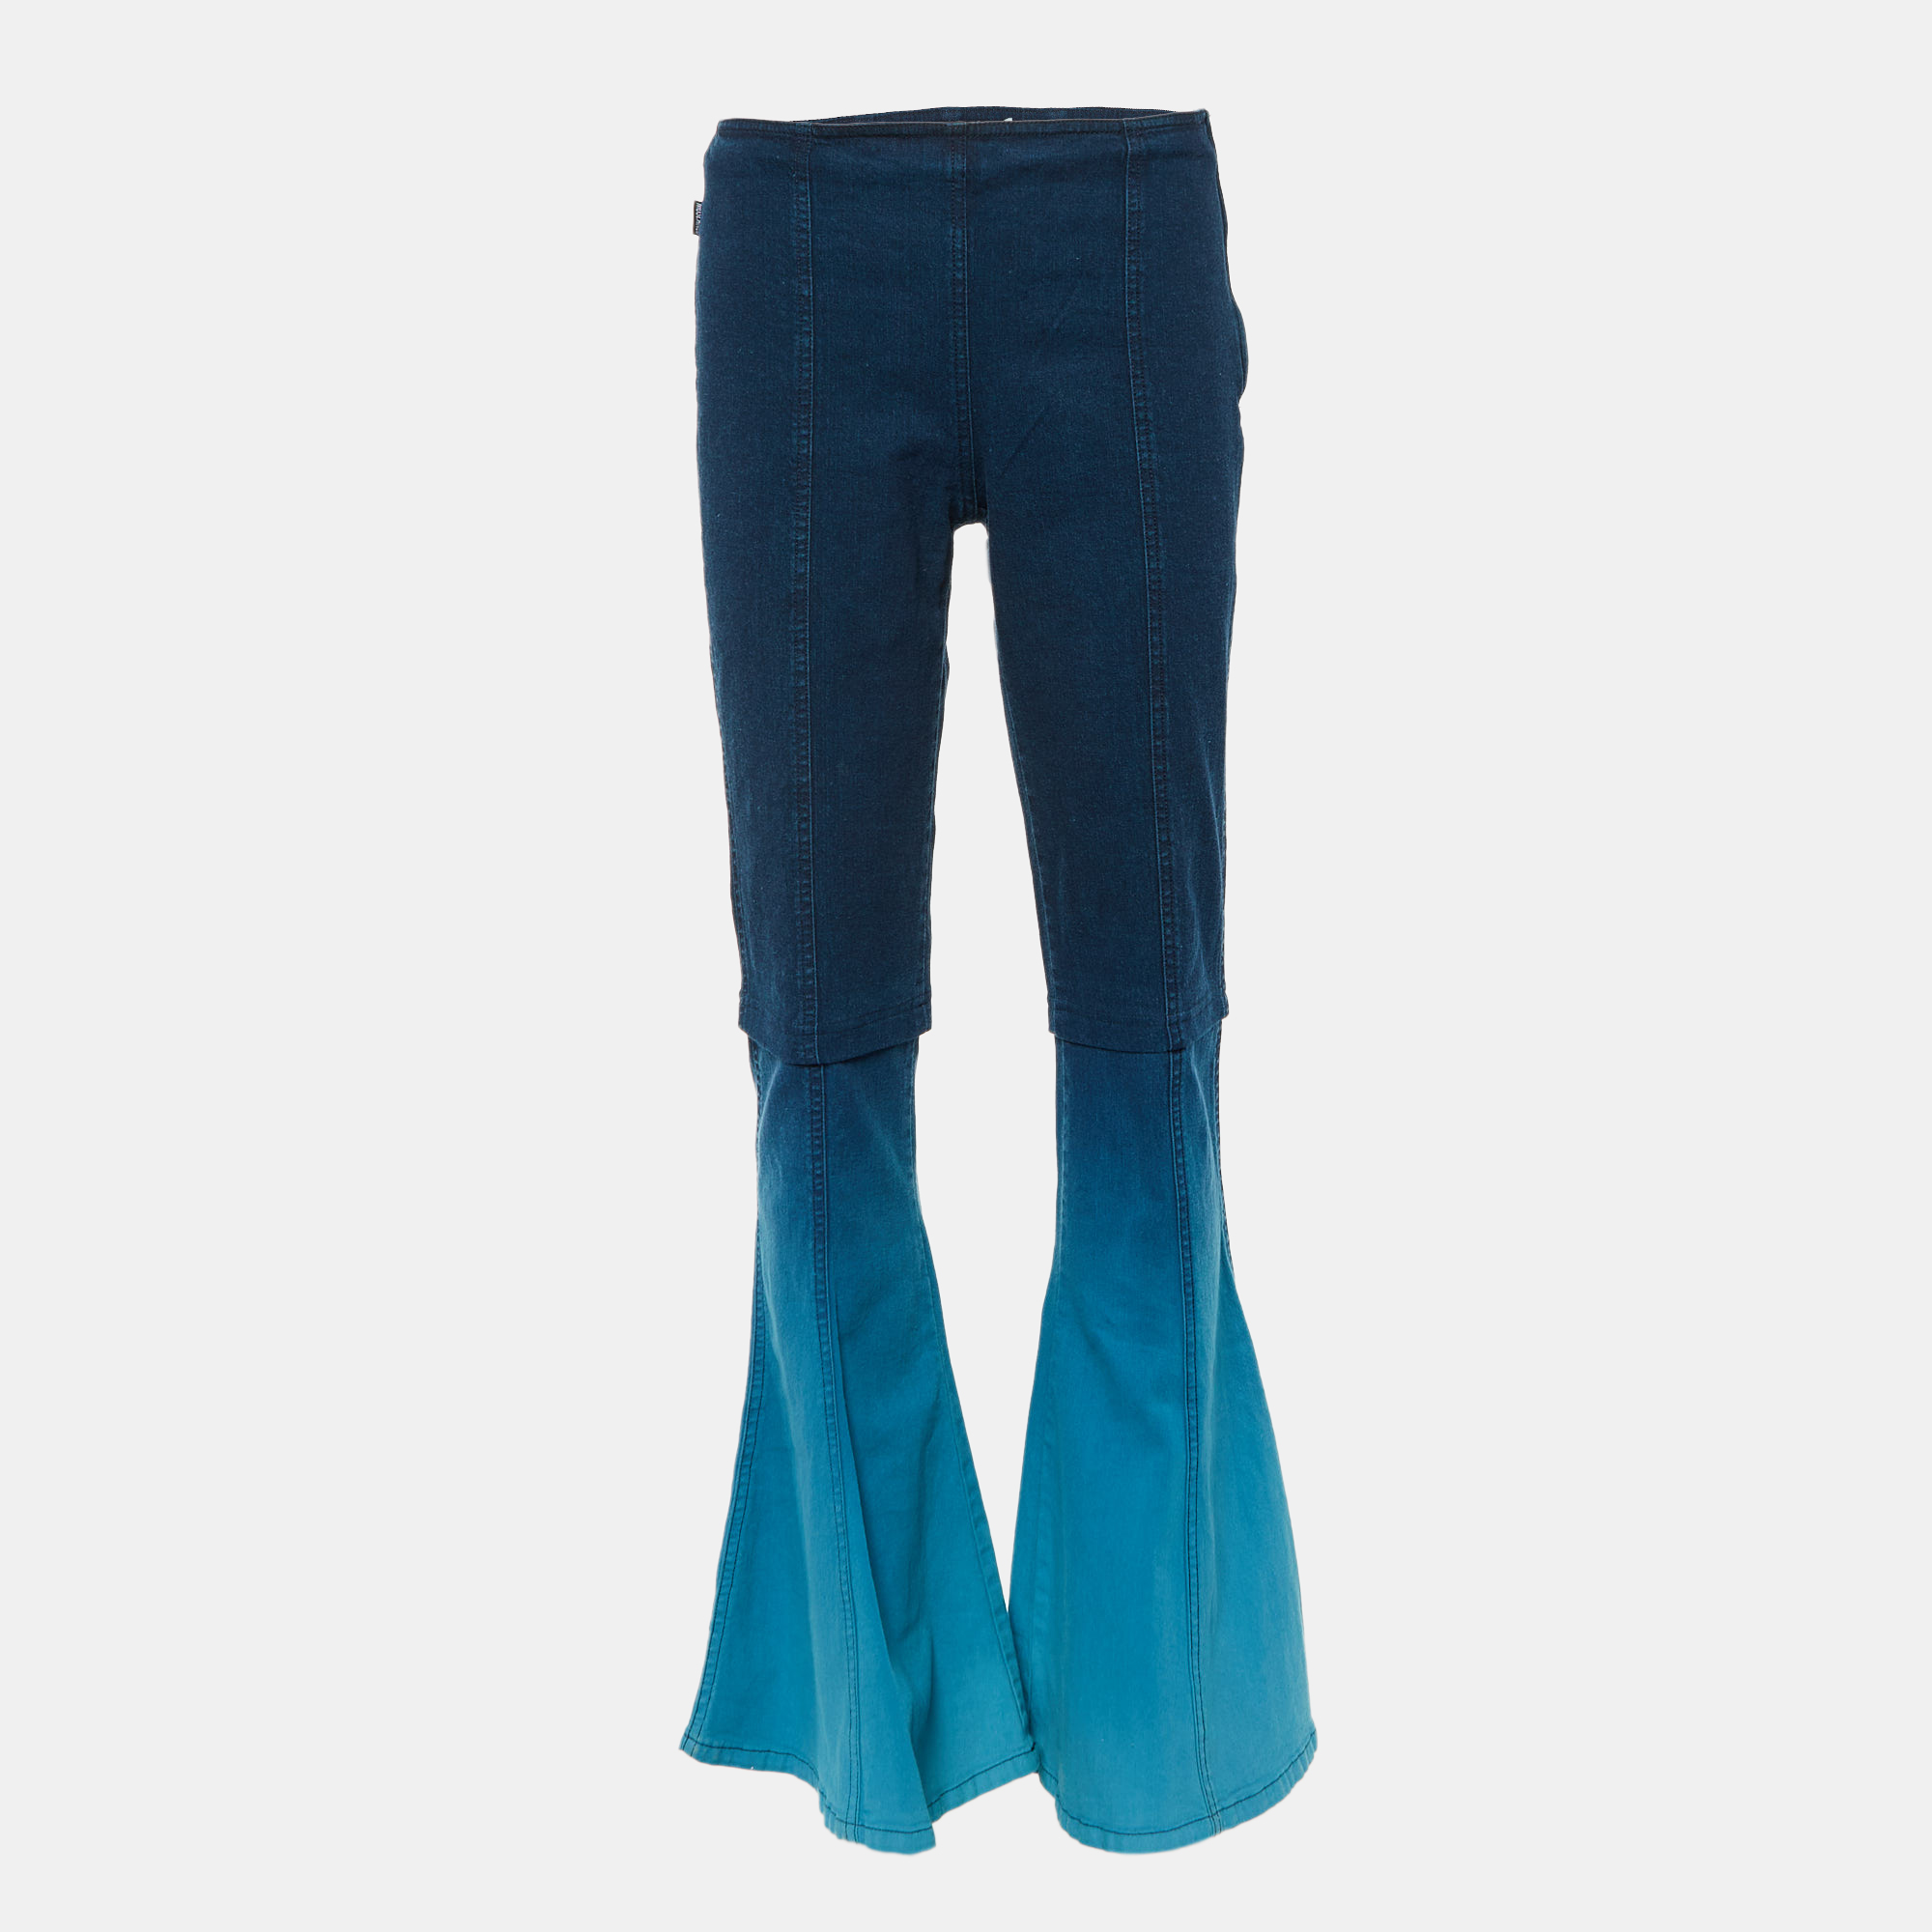 

Moschino Jeans Blue Ombre Denim Flared Jeans  Waist 28